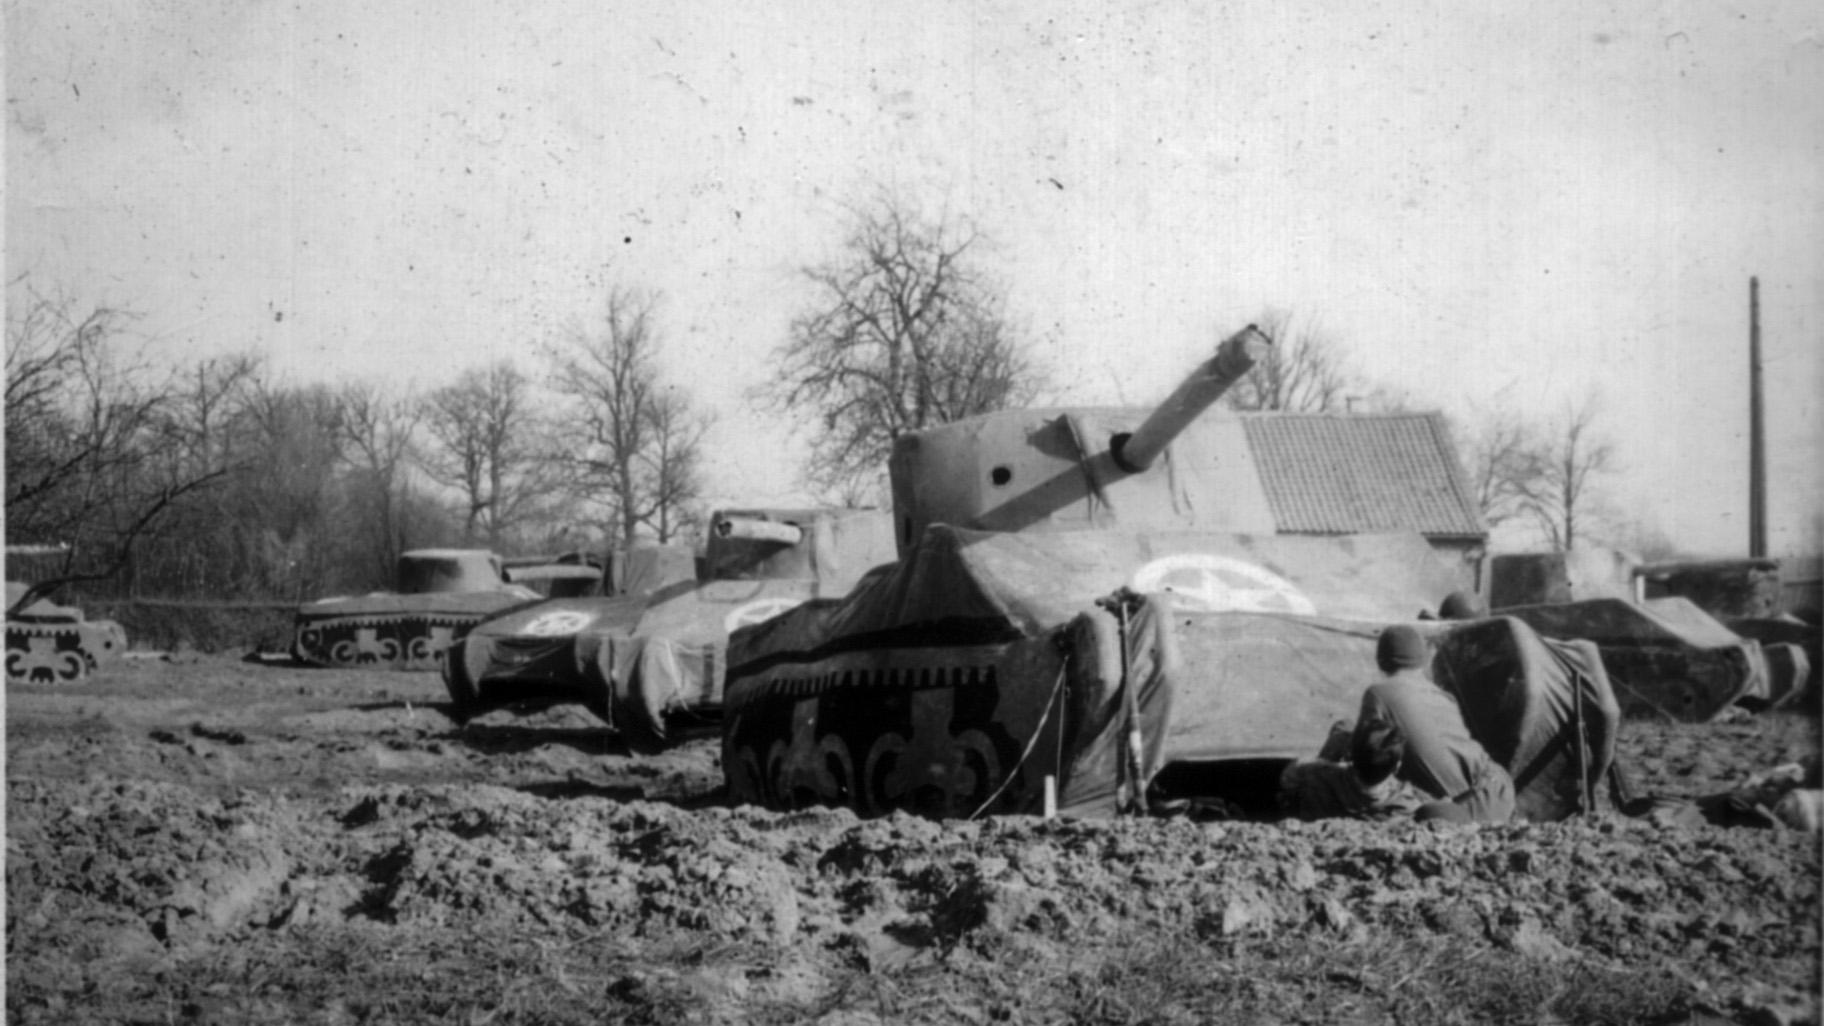 This photo provided by the Ghost Army Legacy Project shows inflatable tanks in March, 1945. For decades, their mission during World War II was a secret. With inflatable tanks, trucks and planes, combined with sound effects, radio trickery, costume uniforms and acting, the American military units that became known as the Ghost Army helped outwit the enemy. (National Archives / Ghost Army Legacy Project via AP)